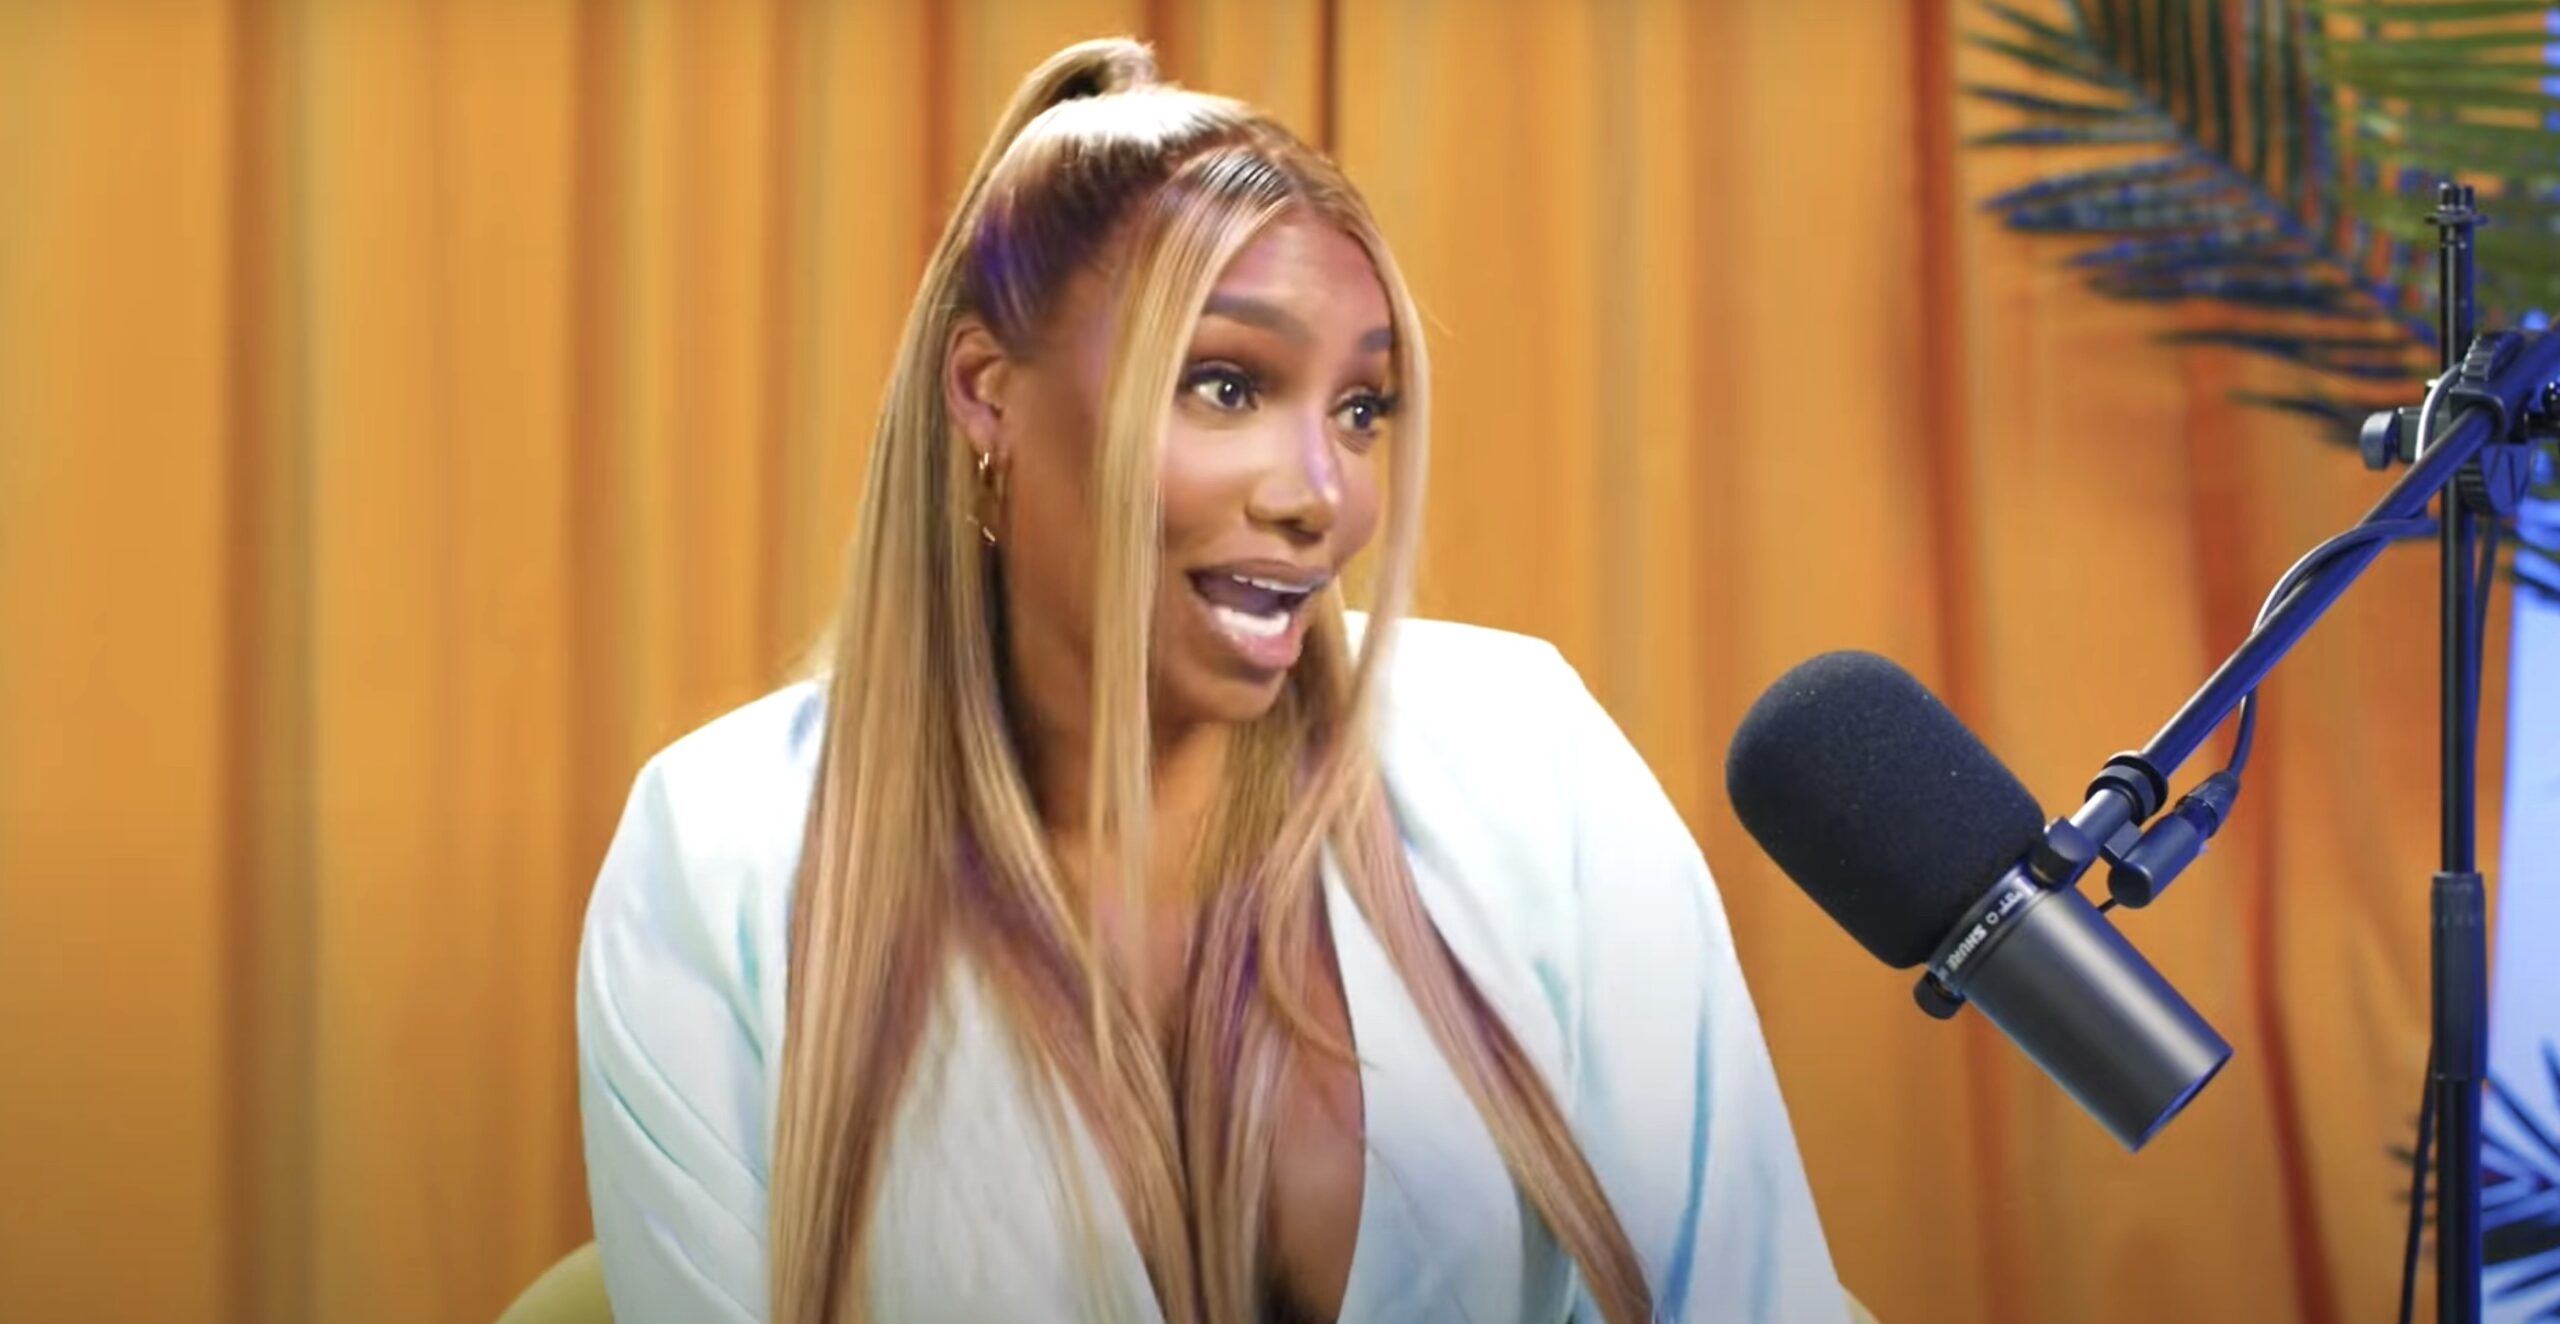 Nene Leakes Talks RHOA Lawsuit / Claims the Show is Star-Less & That Kandi Burruss is “Overrated & Overpaid”